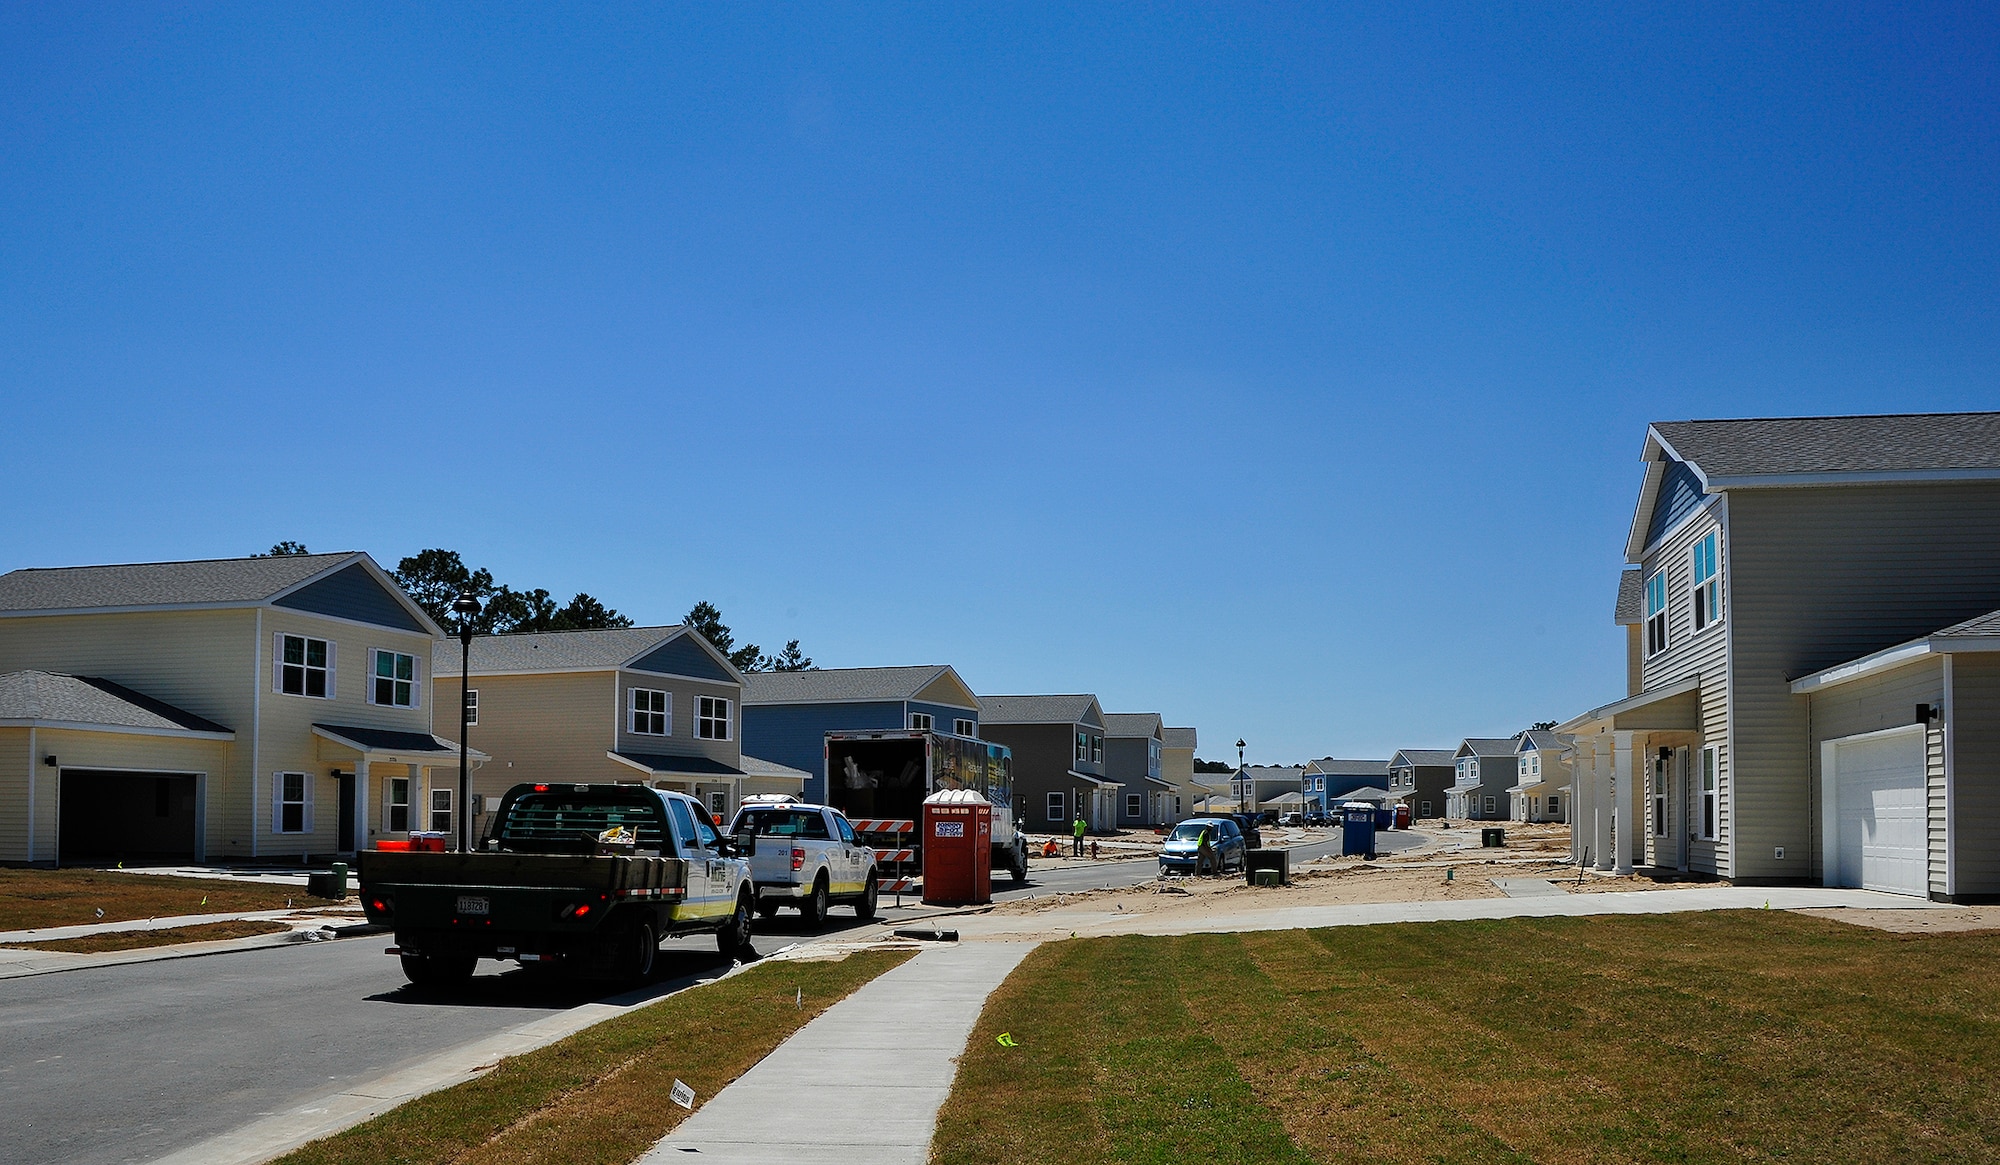 Construction workers complete several of the 747 privatized homes being built on Eglin Air Force Base, Fla., April 7. The new development will include multiple playgrounds, a dog-friendly “bark” park, a community center with a fitness room, and a pool. The entire community is estimated to be completed by 2019. (U.S. Air Force Photo/Jasmine Porterfield) 